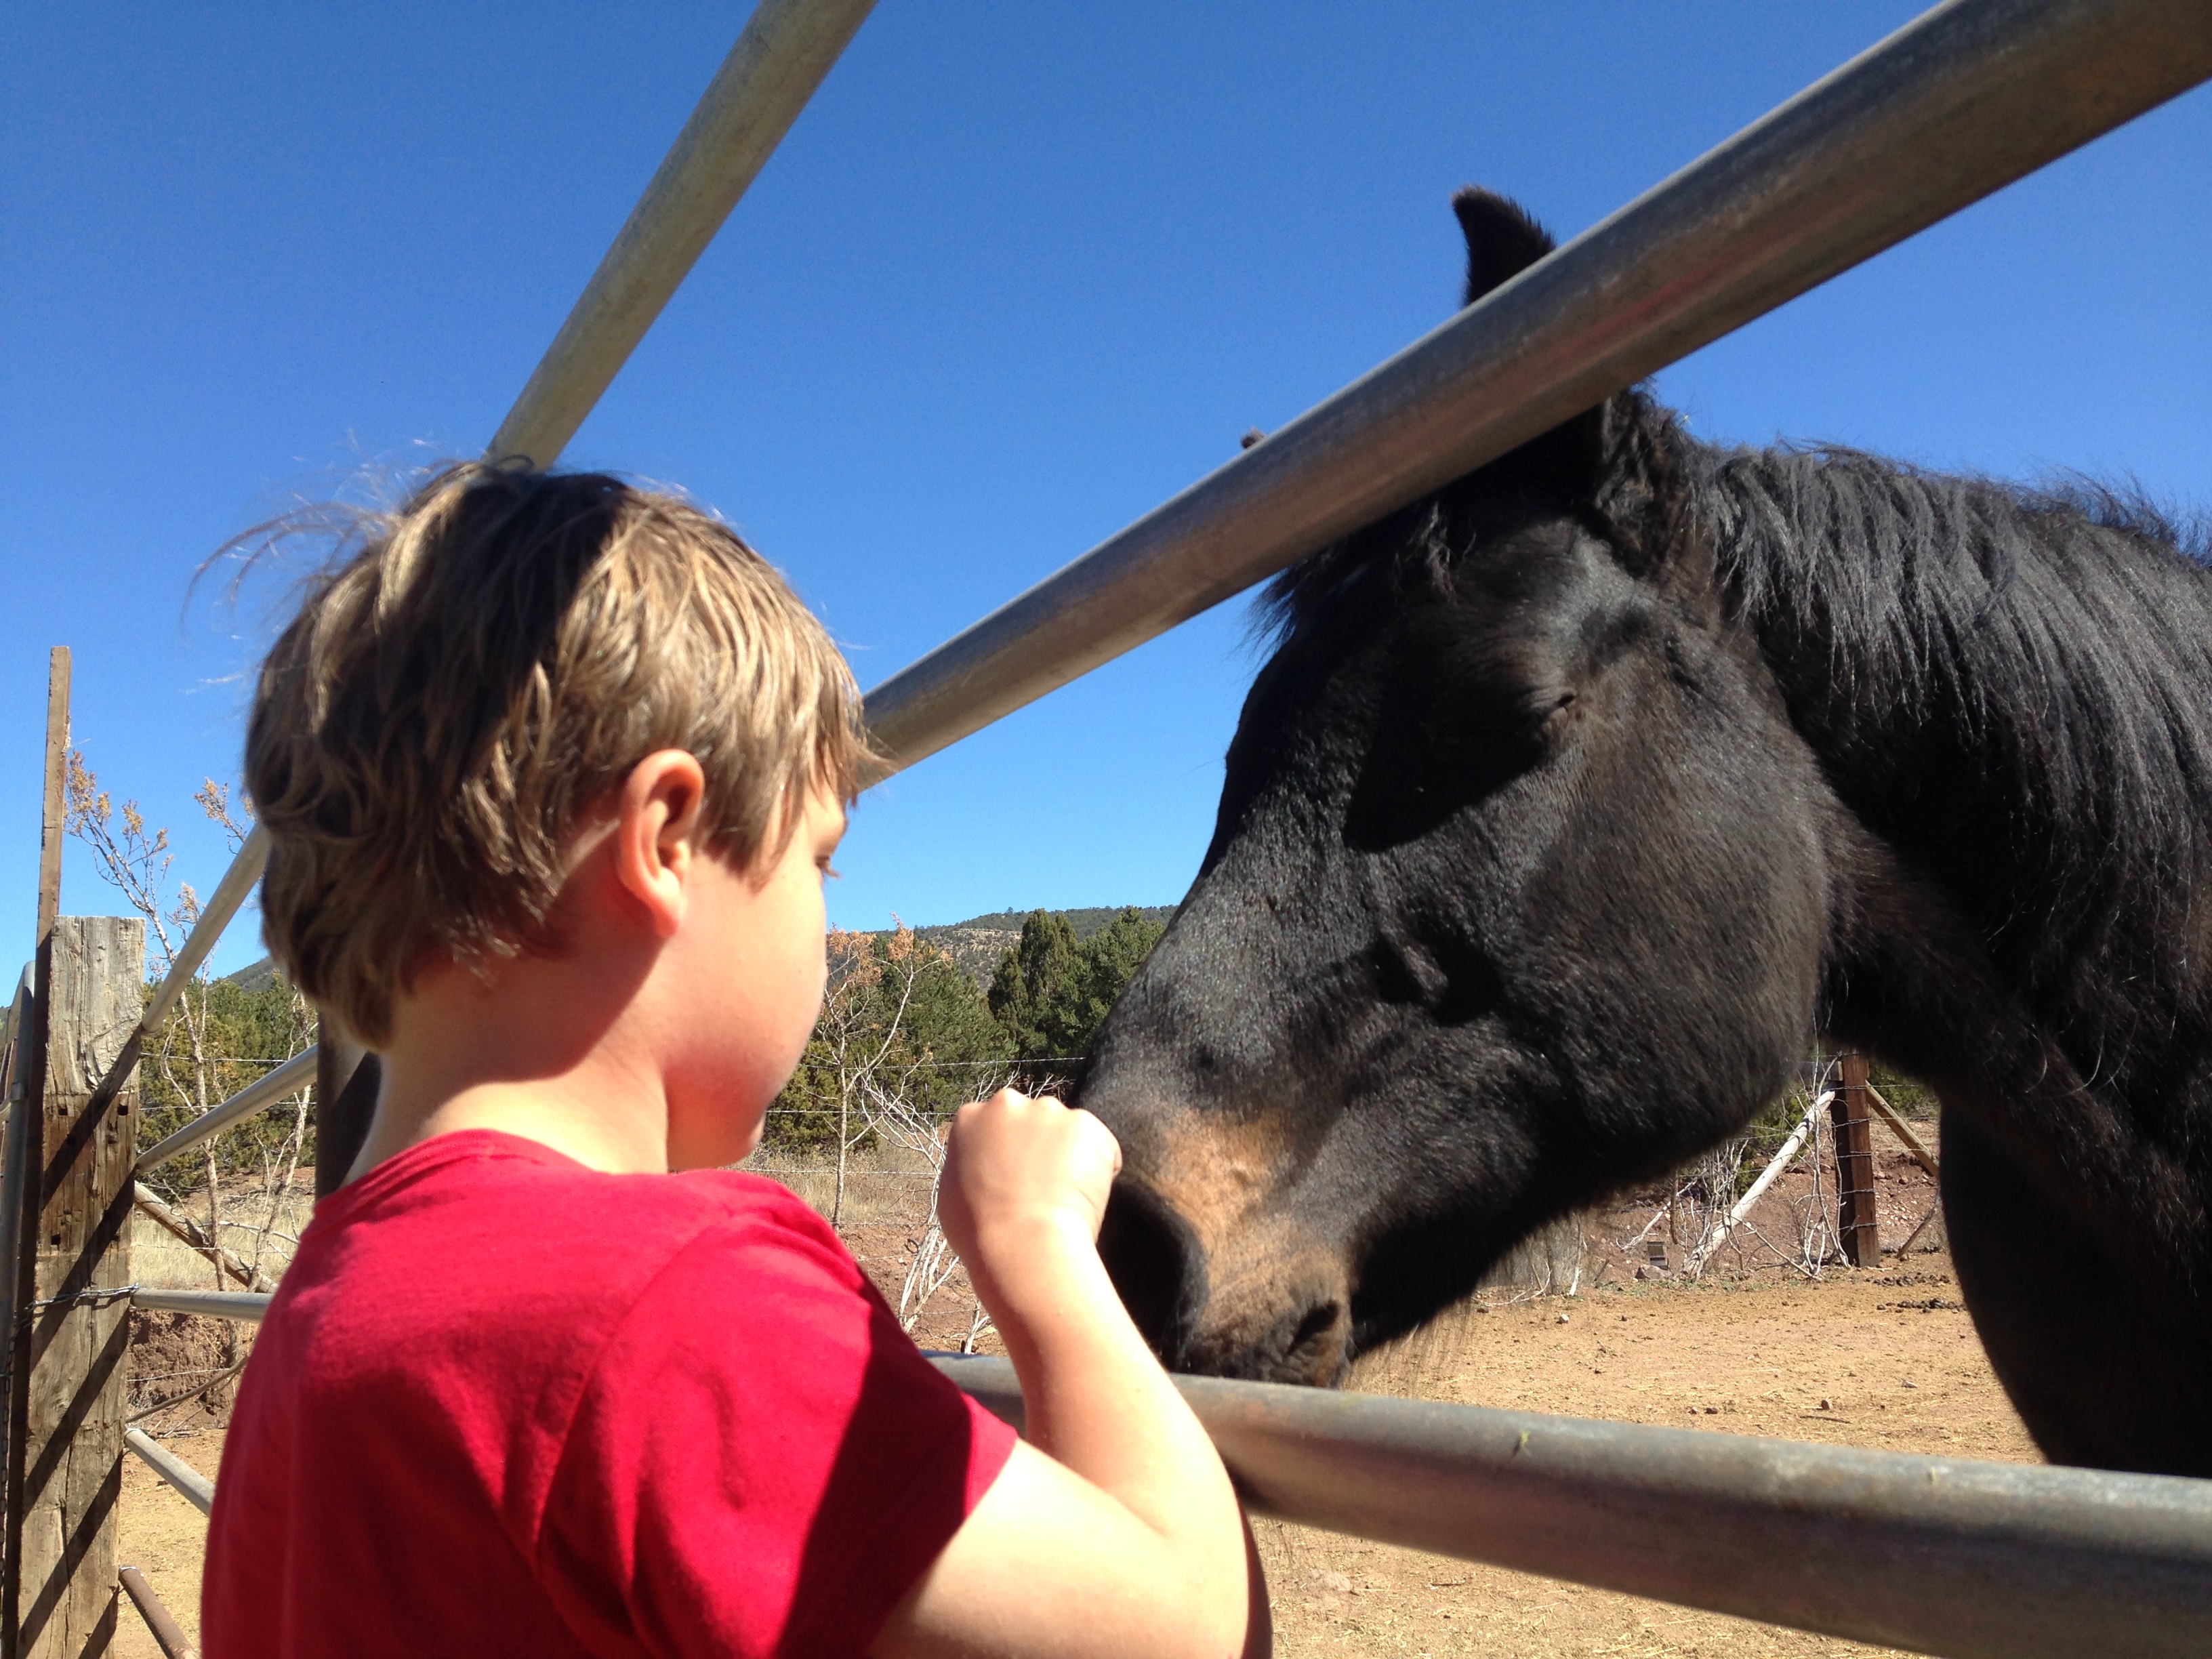 Kaiden knows how to greet horses in a way they understand.